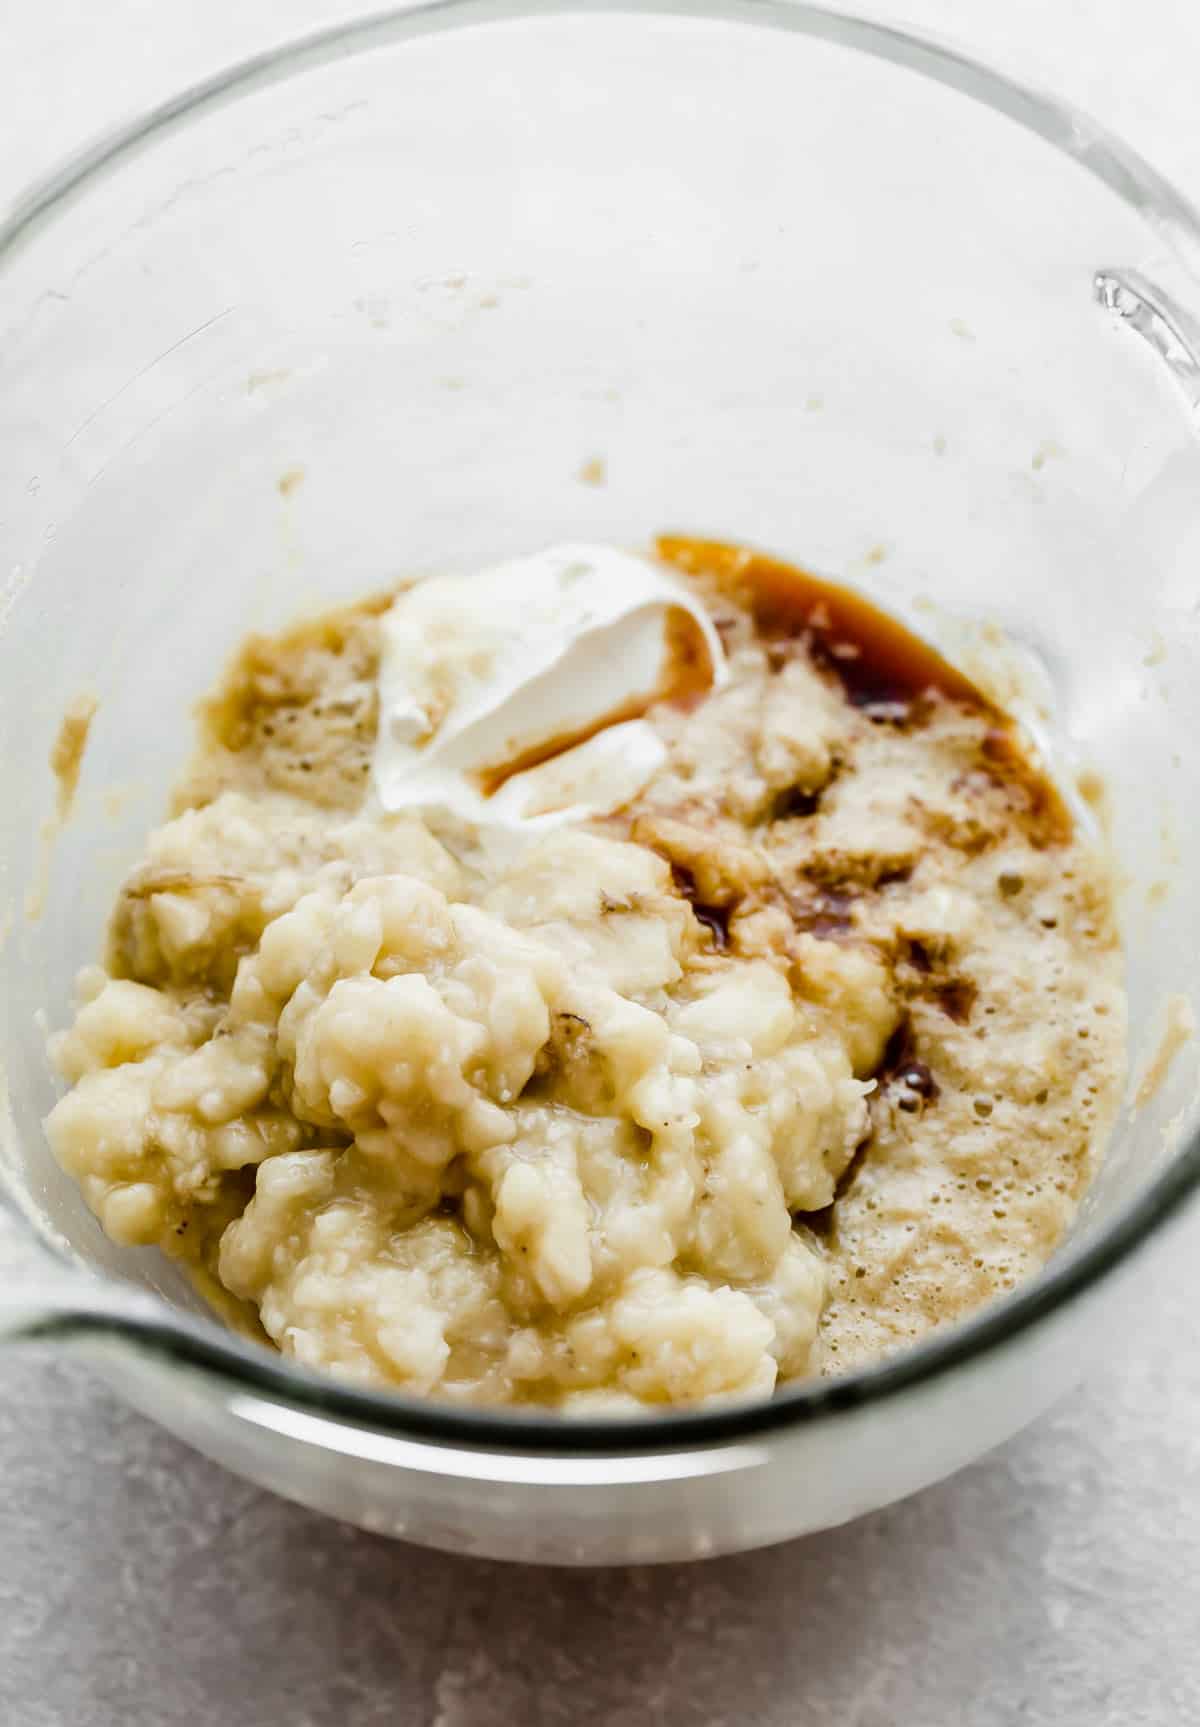 Mashed bananas, sour cream, and other Banana Bread Recipe ingredients in a glass mixing bowl.